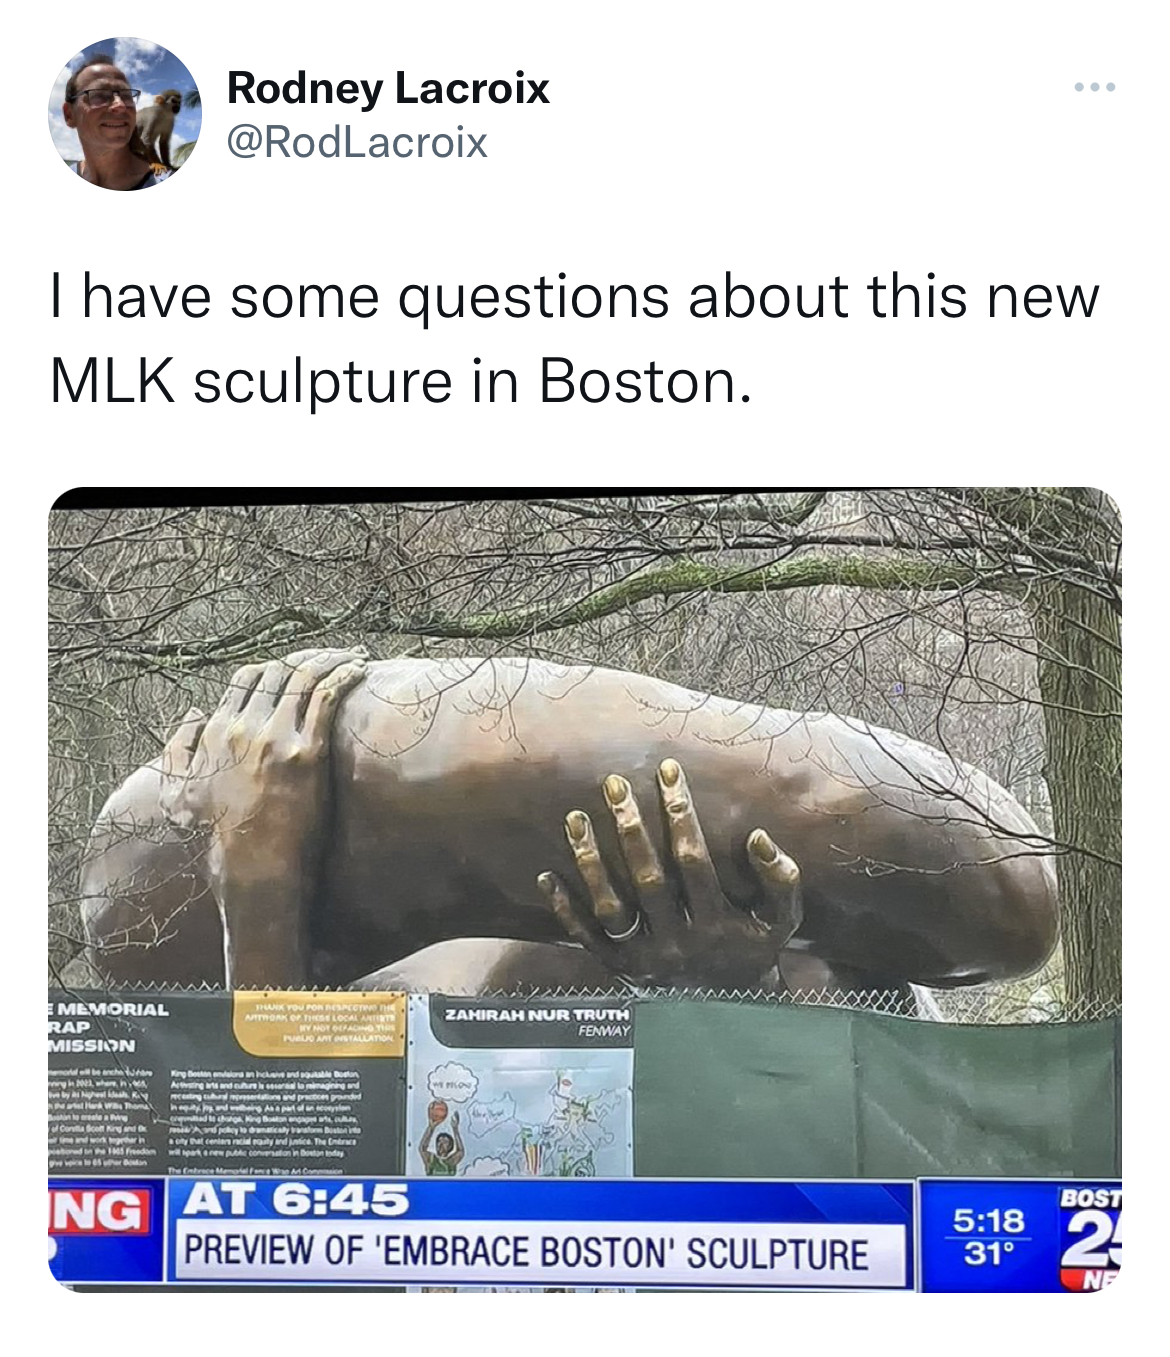 MLK Jr. Sculpture memes - Statue - I have some questions about this new Mlk sculpture in Boston. Memorial Rodney Lacroix Rap Mission Ng At Zahirah Nur Truth Vaa Preview Of 'Embrace Boston' Sculpture Bost 2 31 Ne